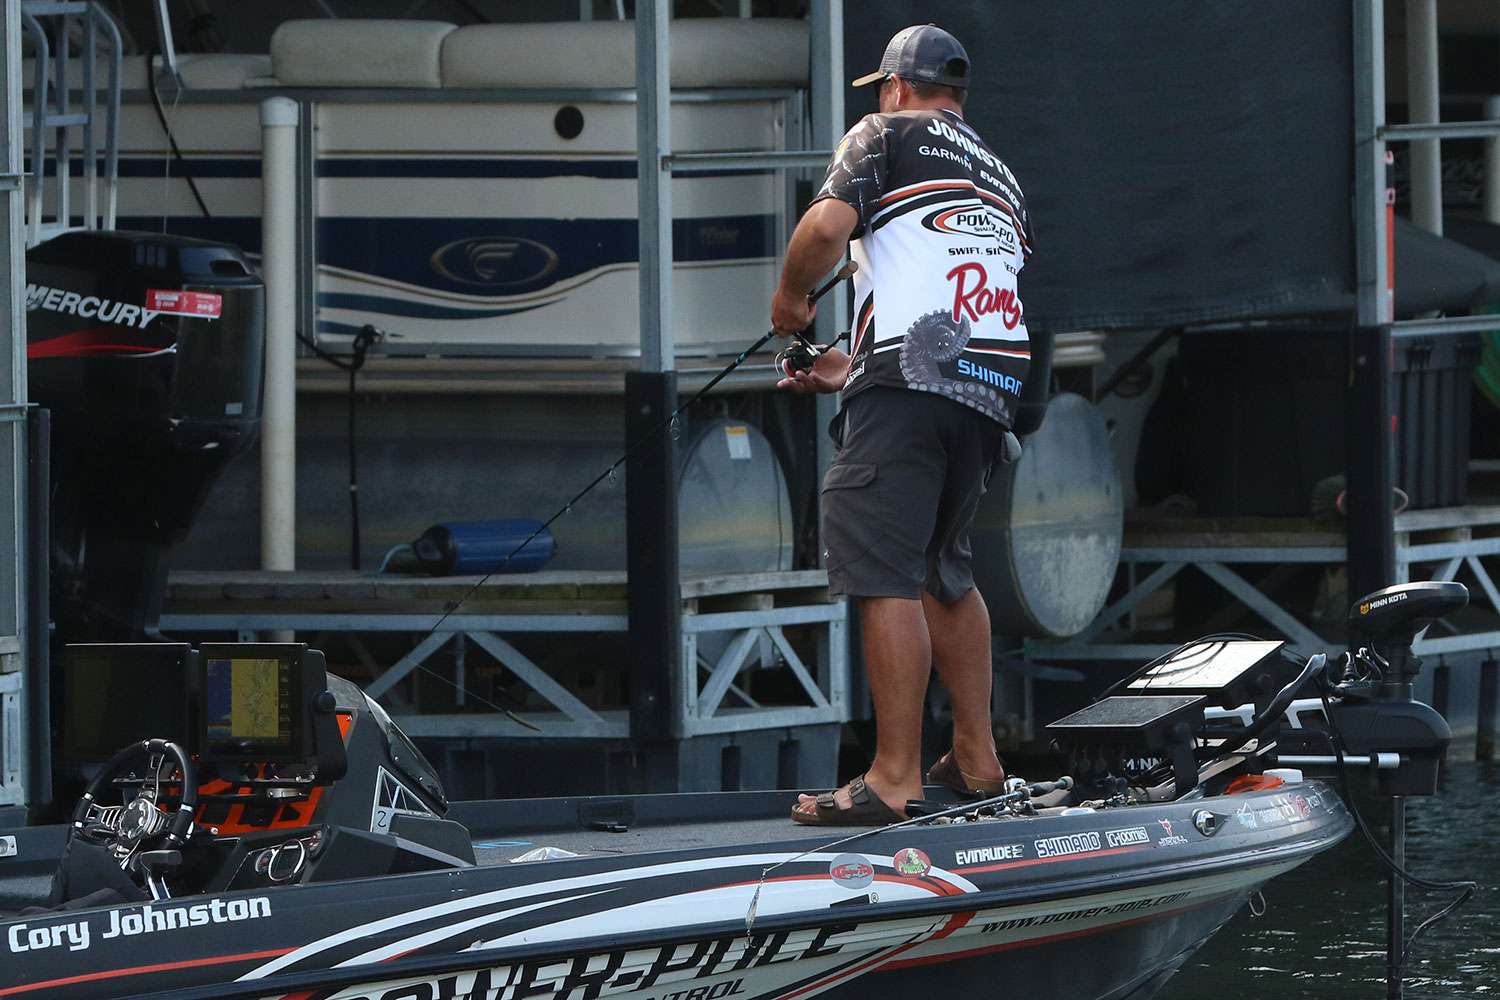 Cory Johnston makes a strong showing during Day 3 of the 2019 Cherokee Casino Tahlequah Bassmaster Elite at Lake Tenkiller.